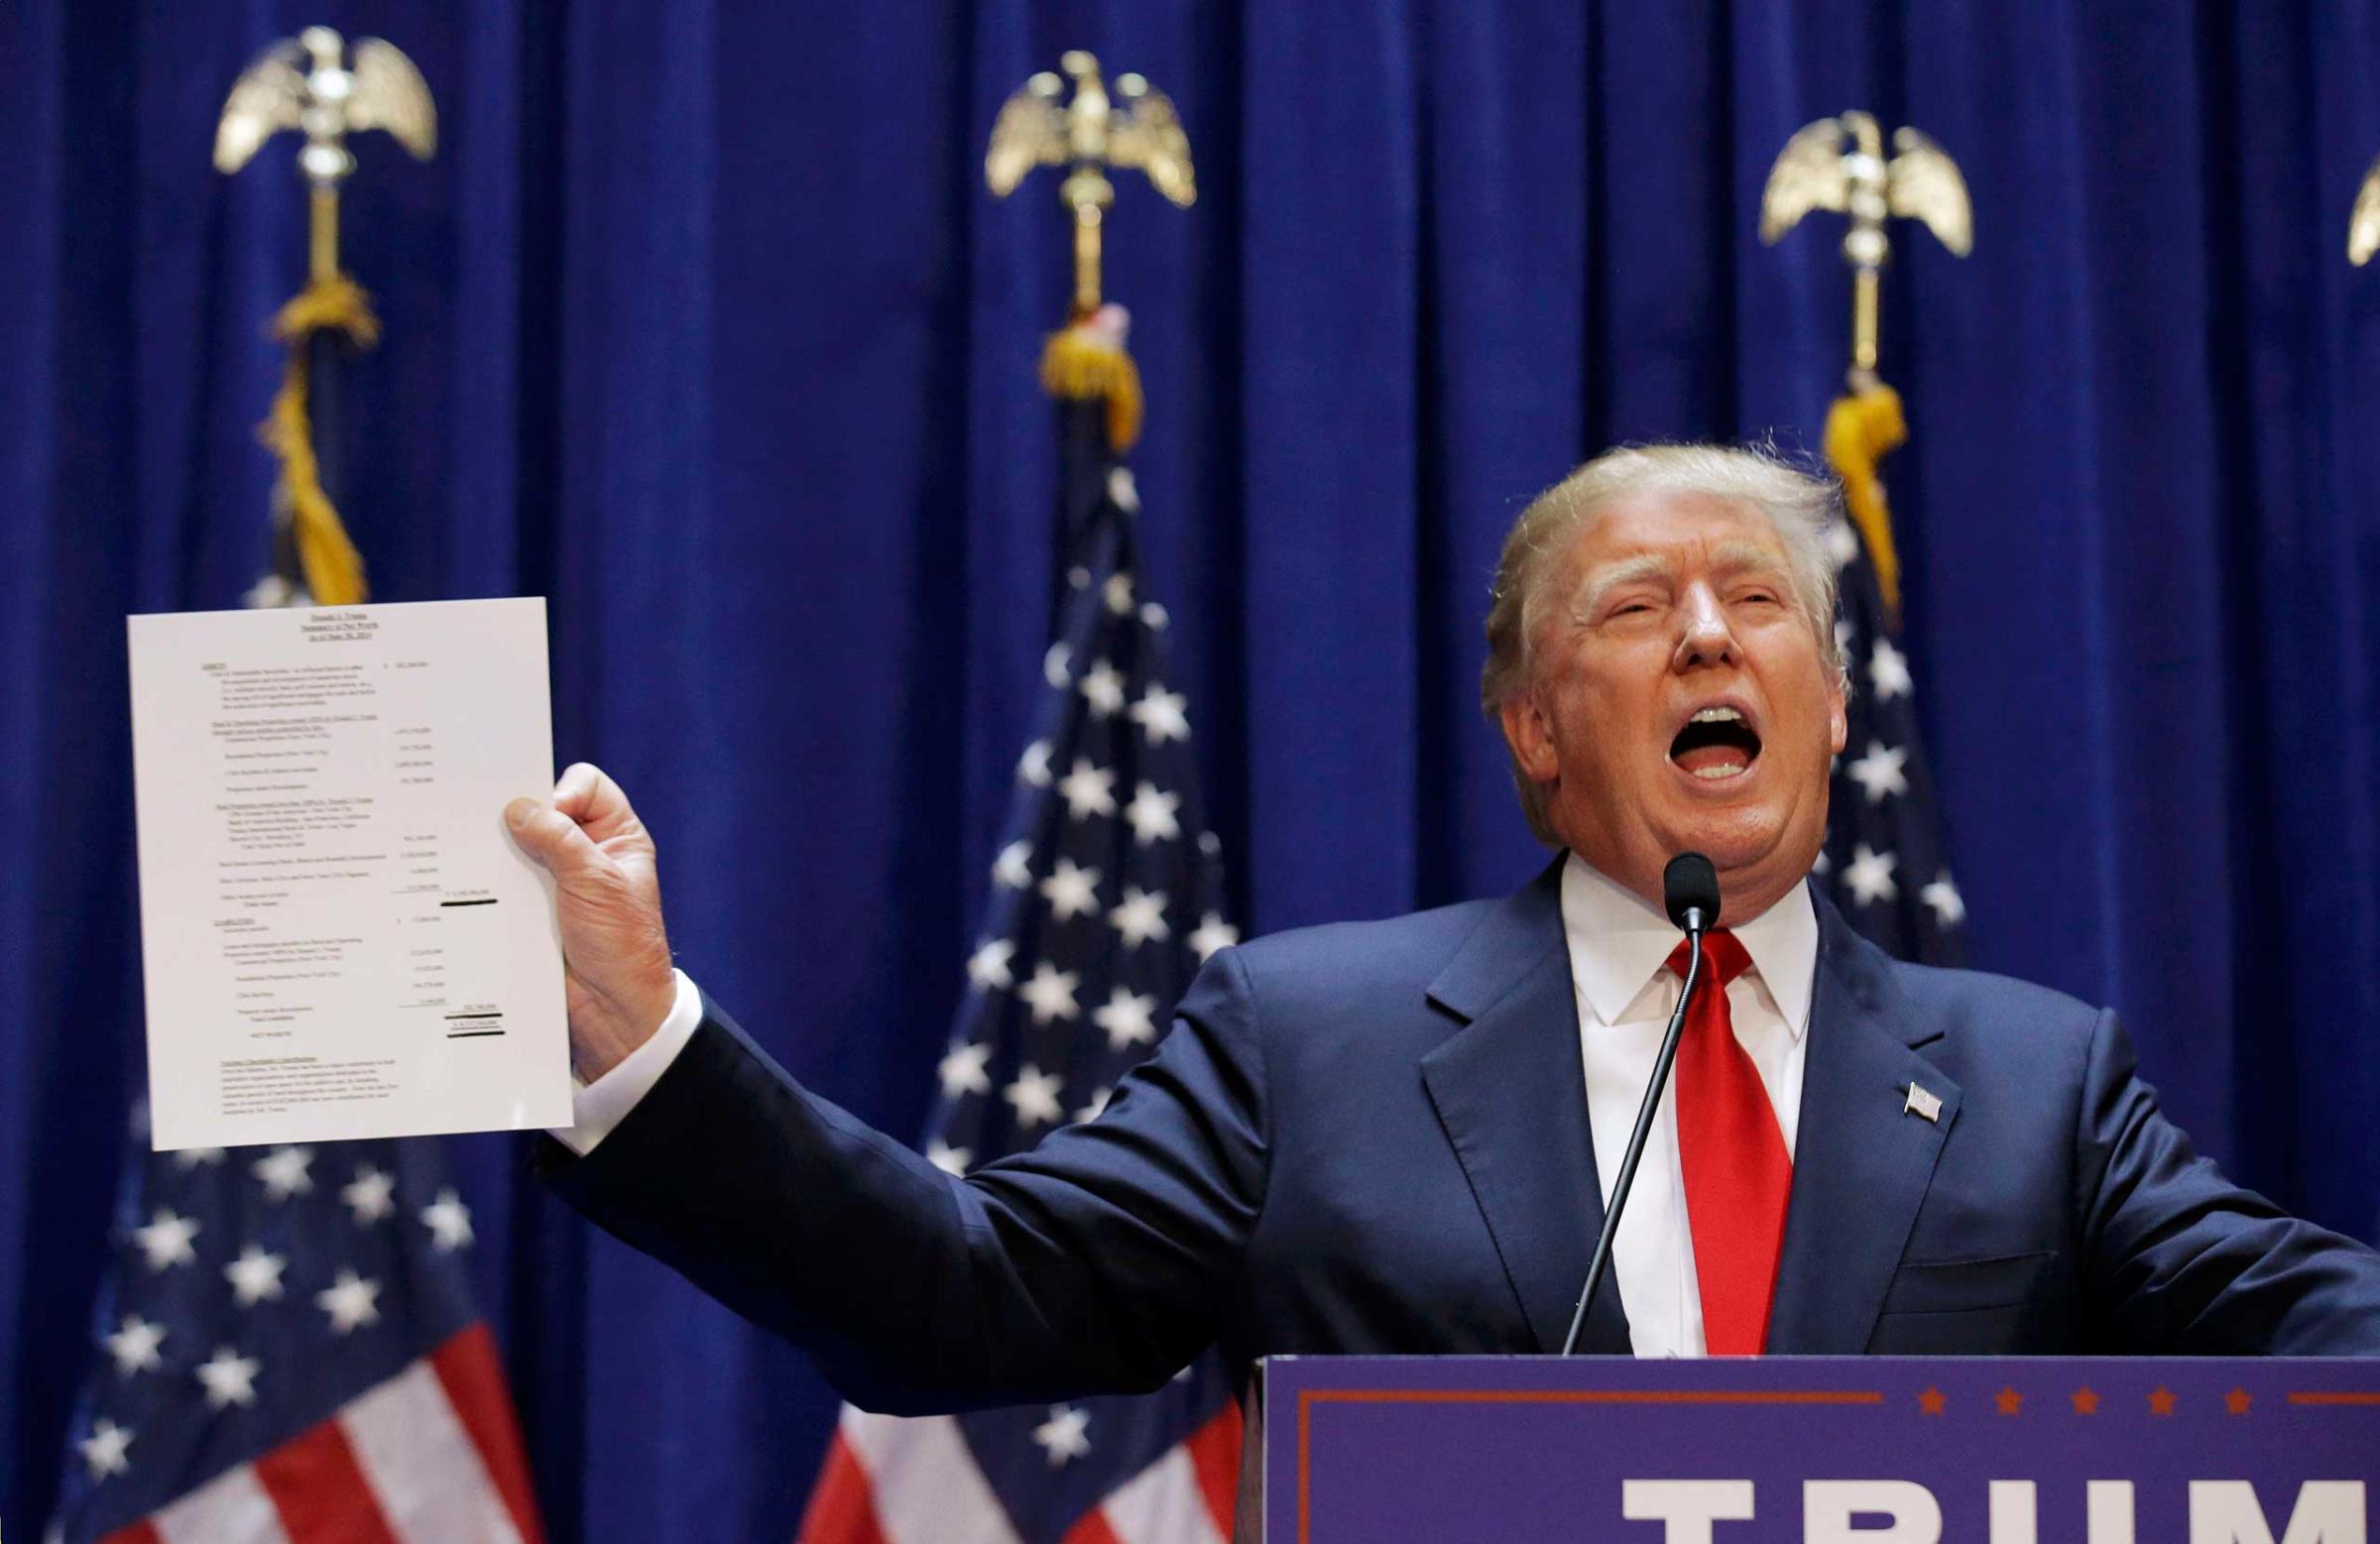 U.S. Republican presidential candidate Trump holds up his financial statement as he formally announces his campaign for the 2016 Republican presidential nomination at Trump Tower in New York